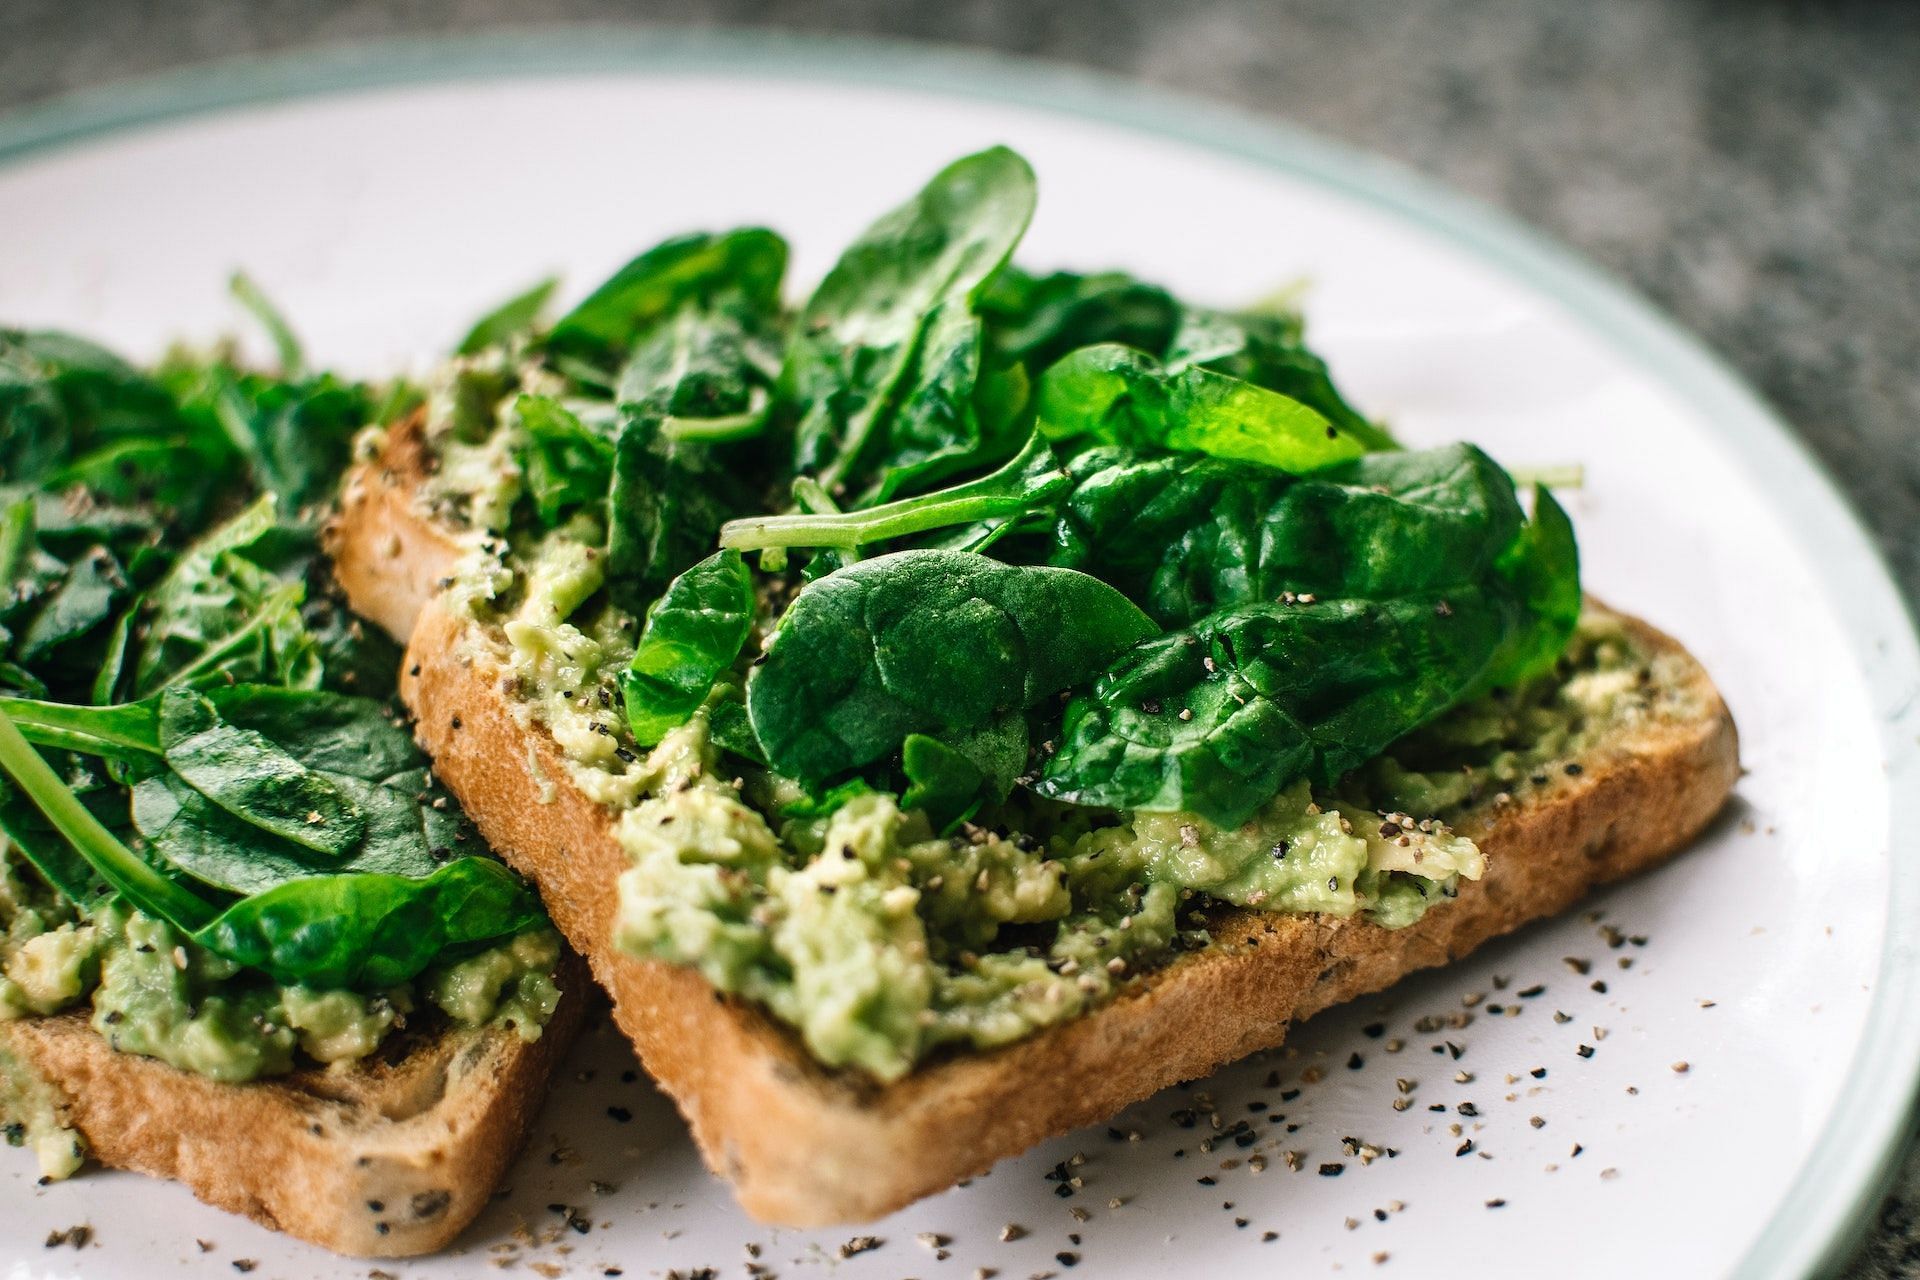 Spinach is one of the best sources of iron. (Photo via Pexels/Lisa Fotios)